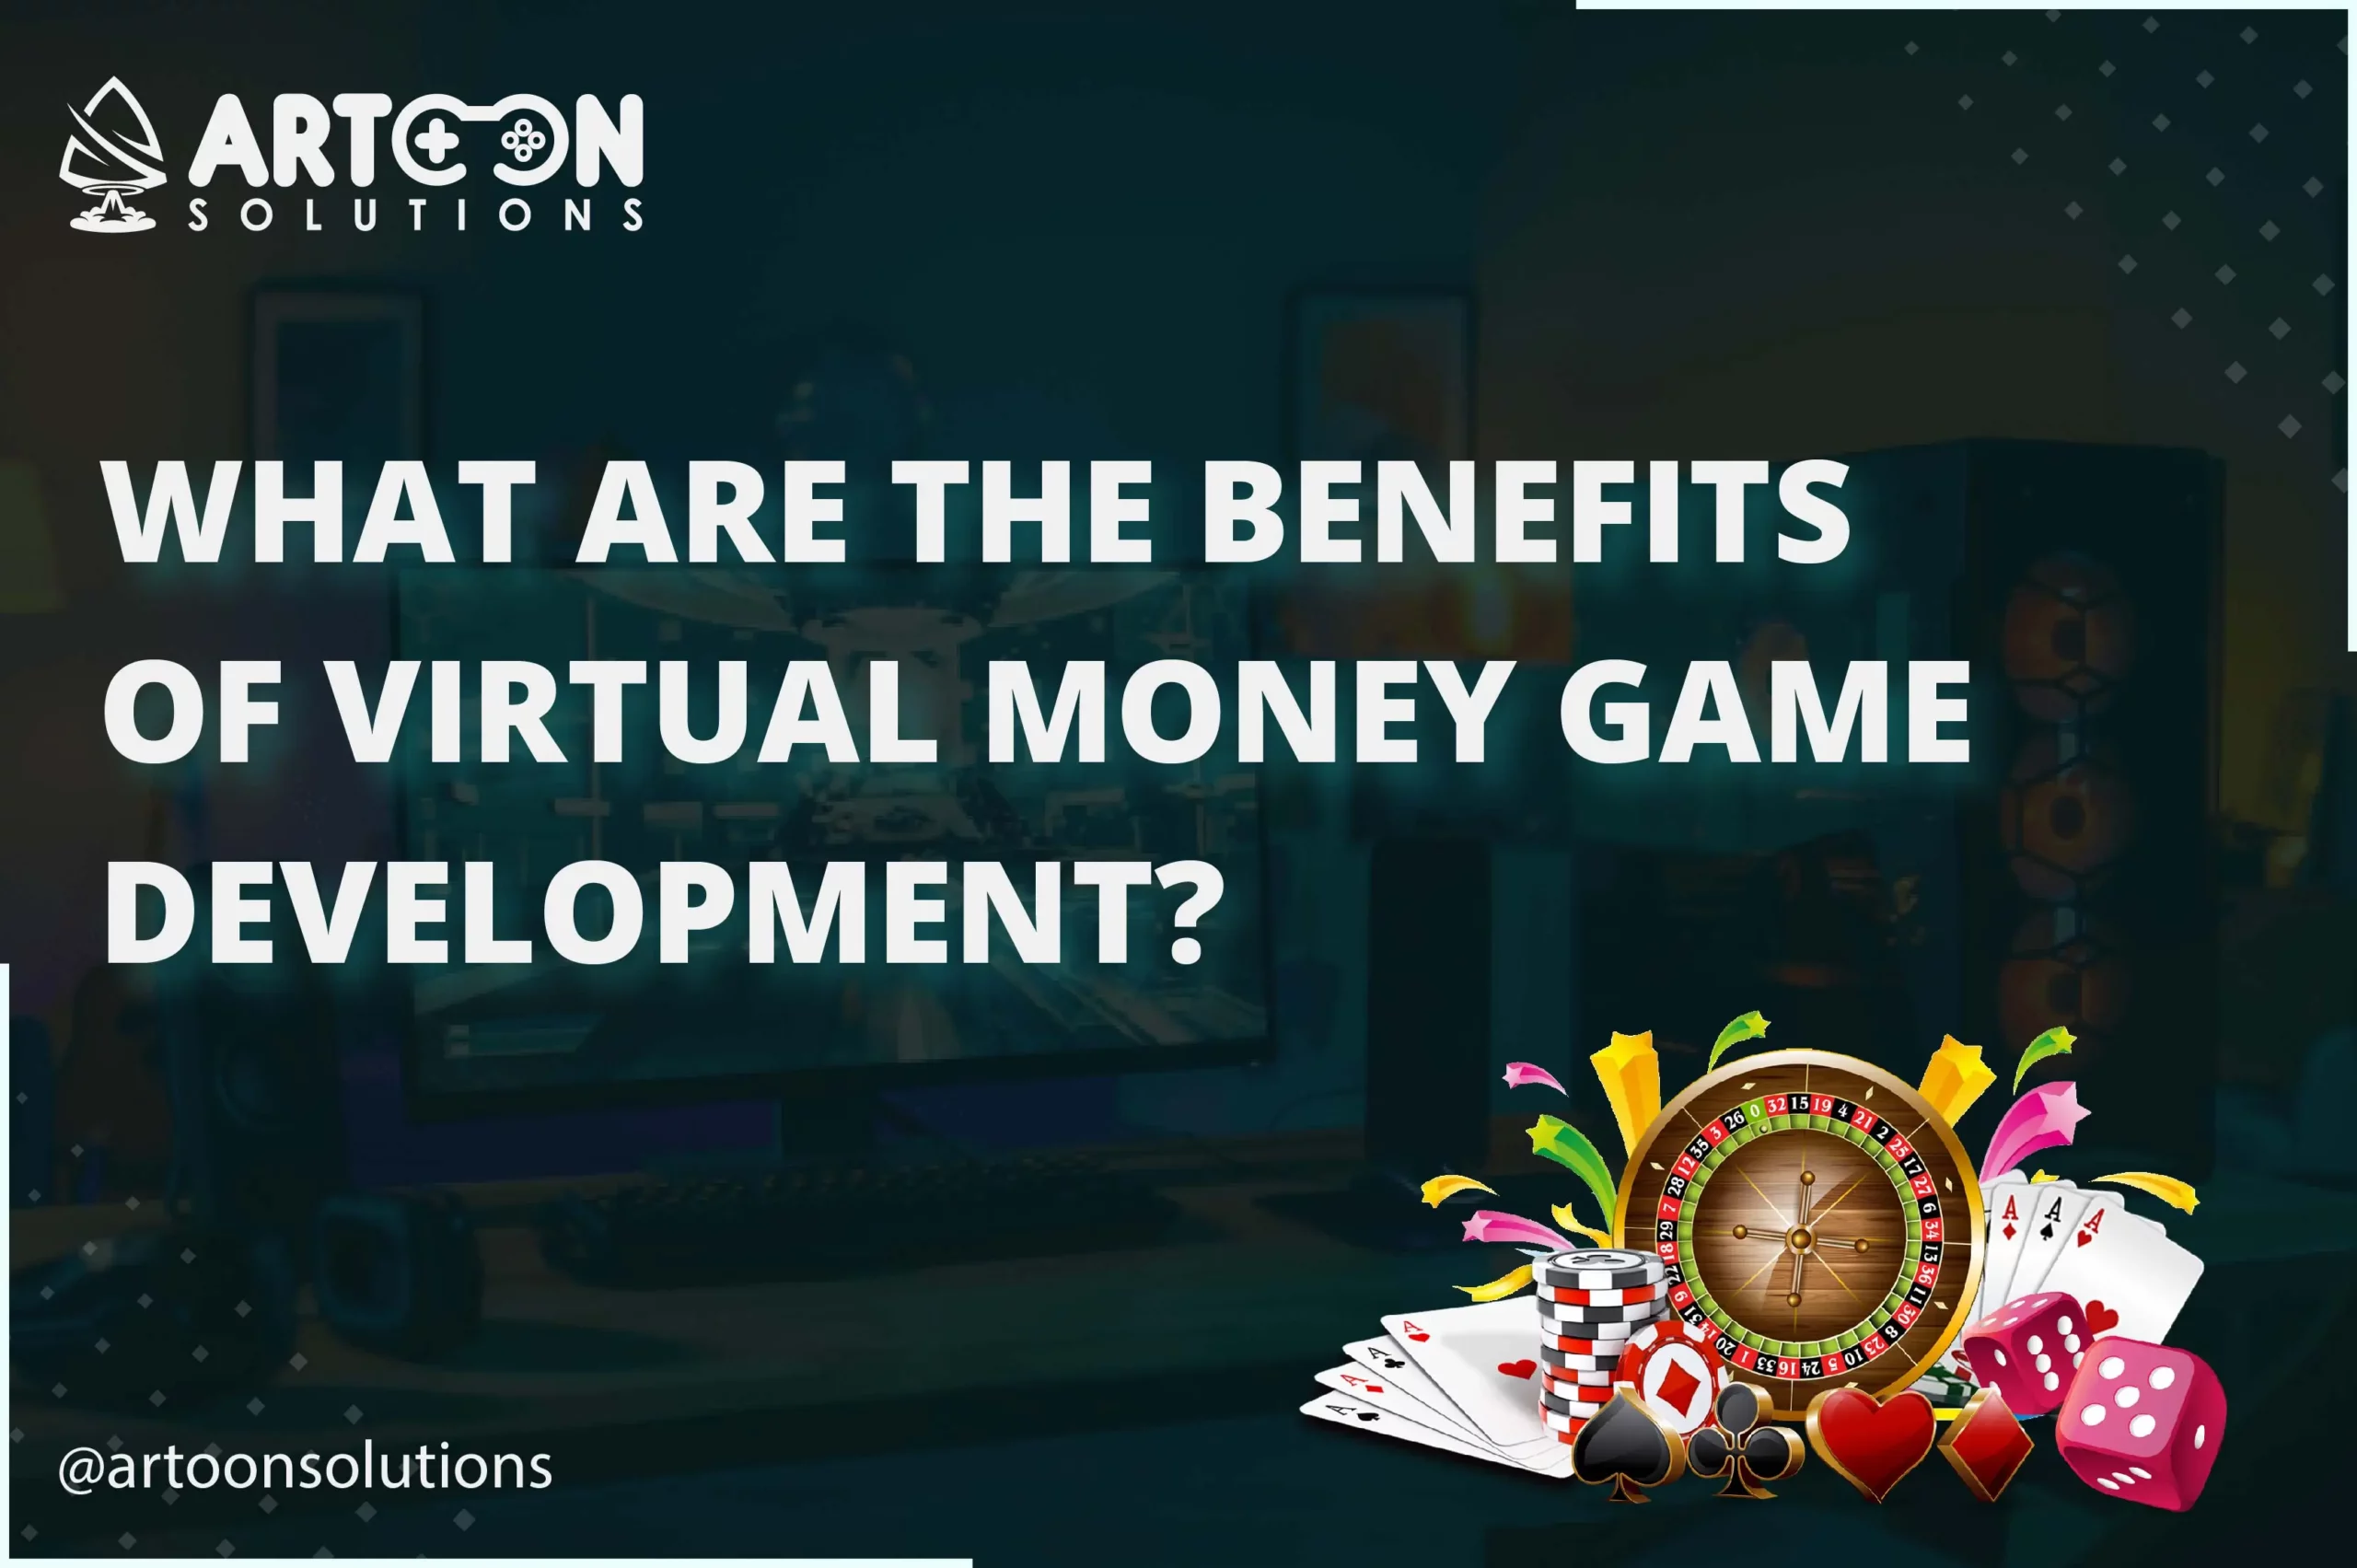 What Are the Benefits of Virtual Money Game Development